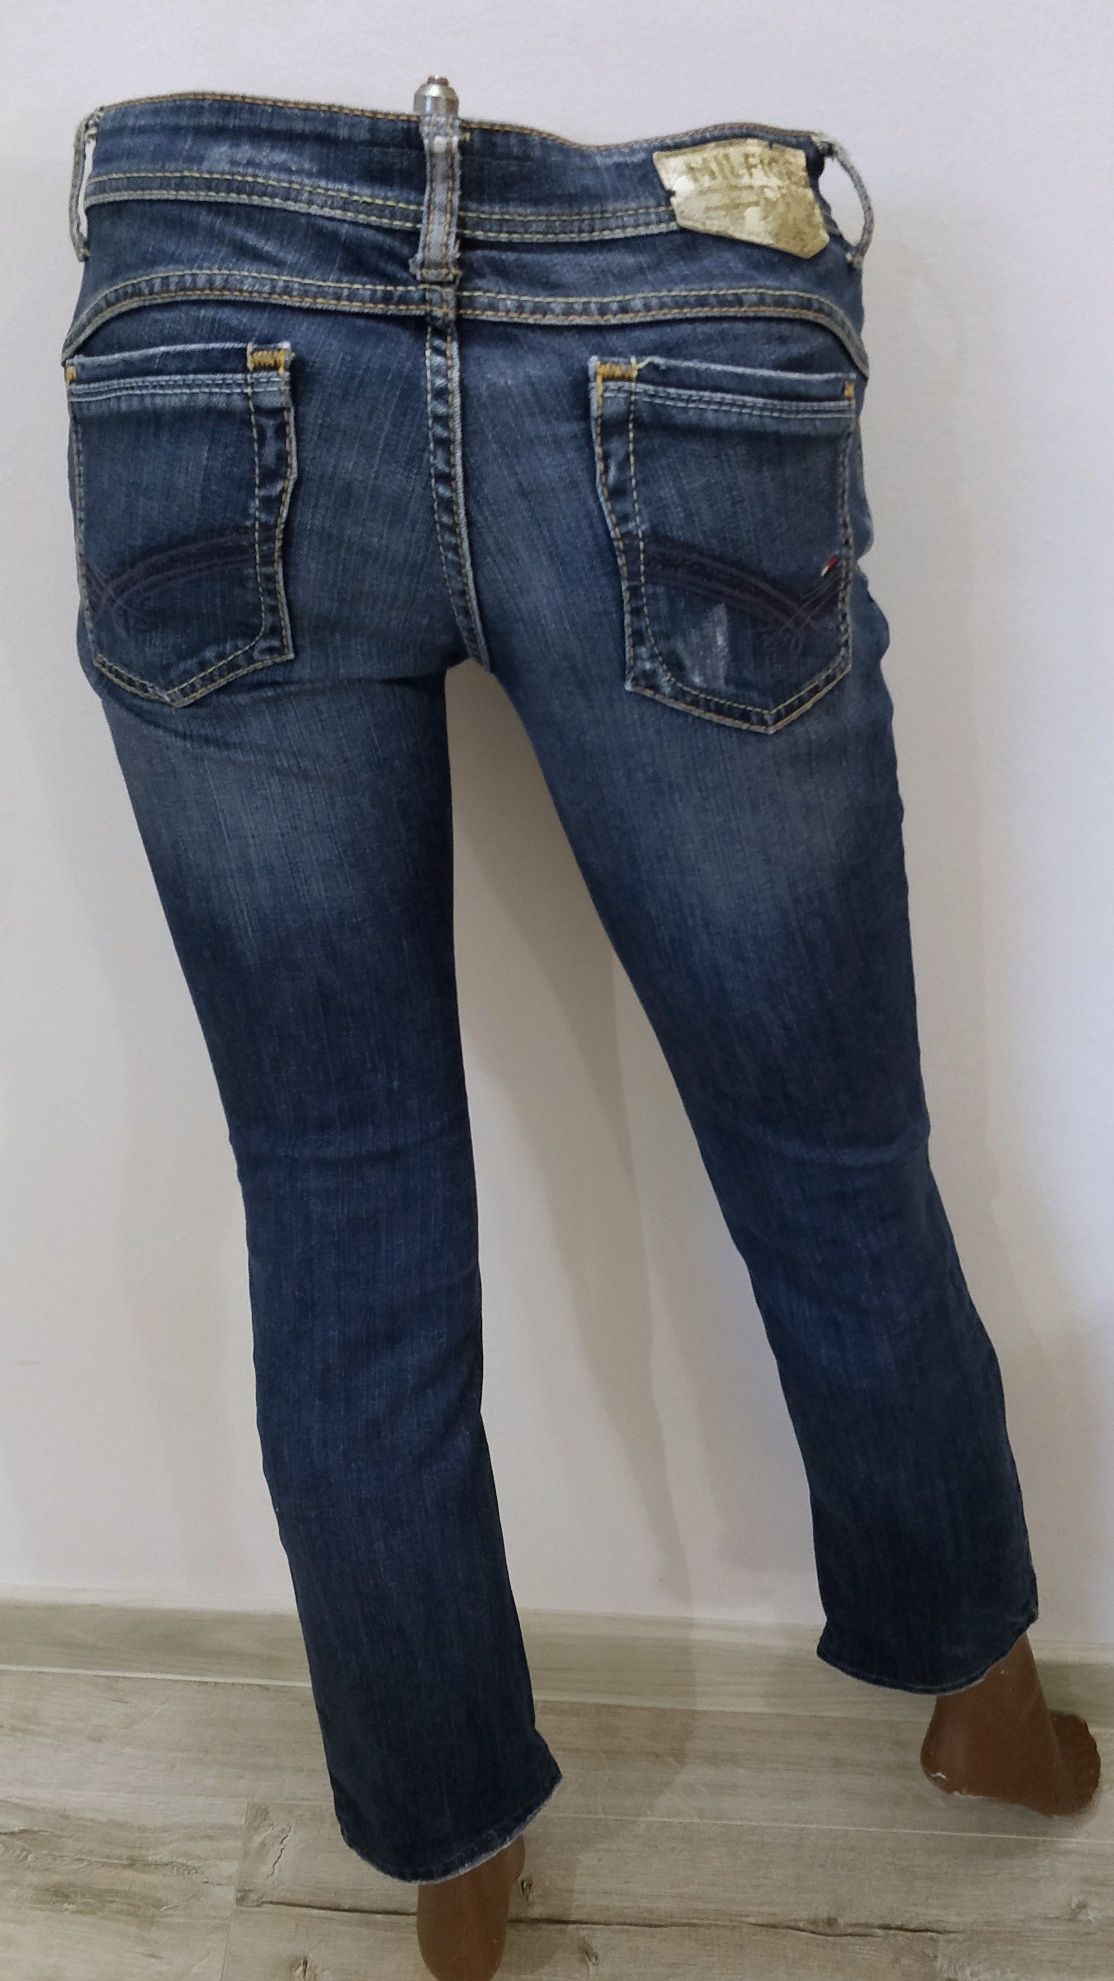 Jeansy Tommy Hilfiger r. 27/30